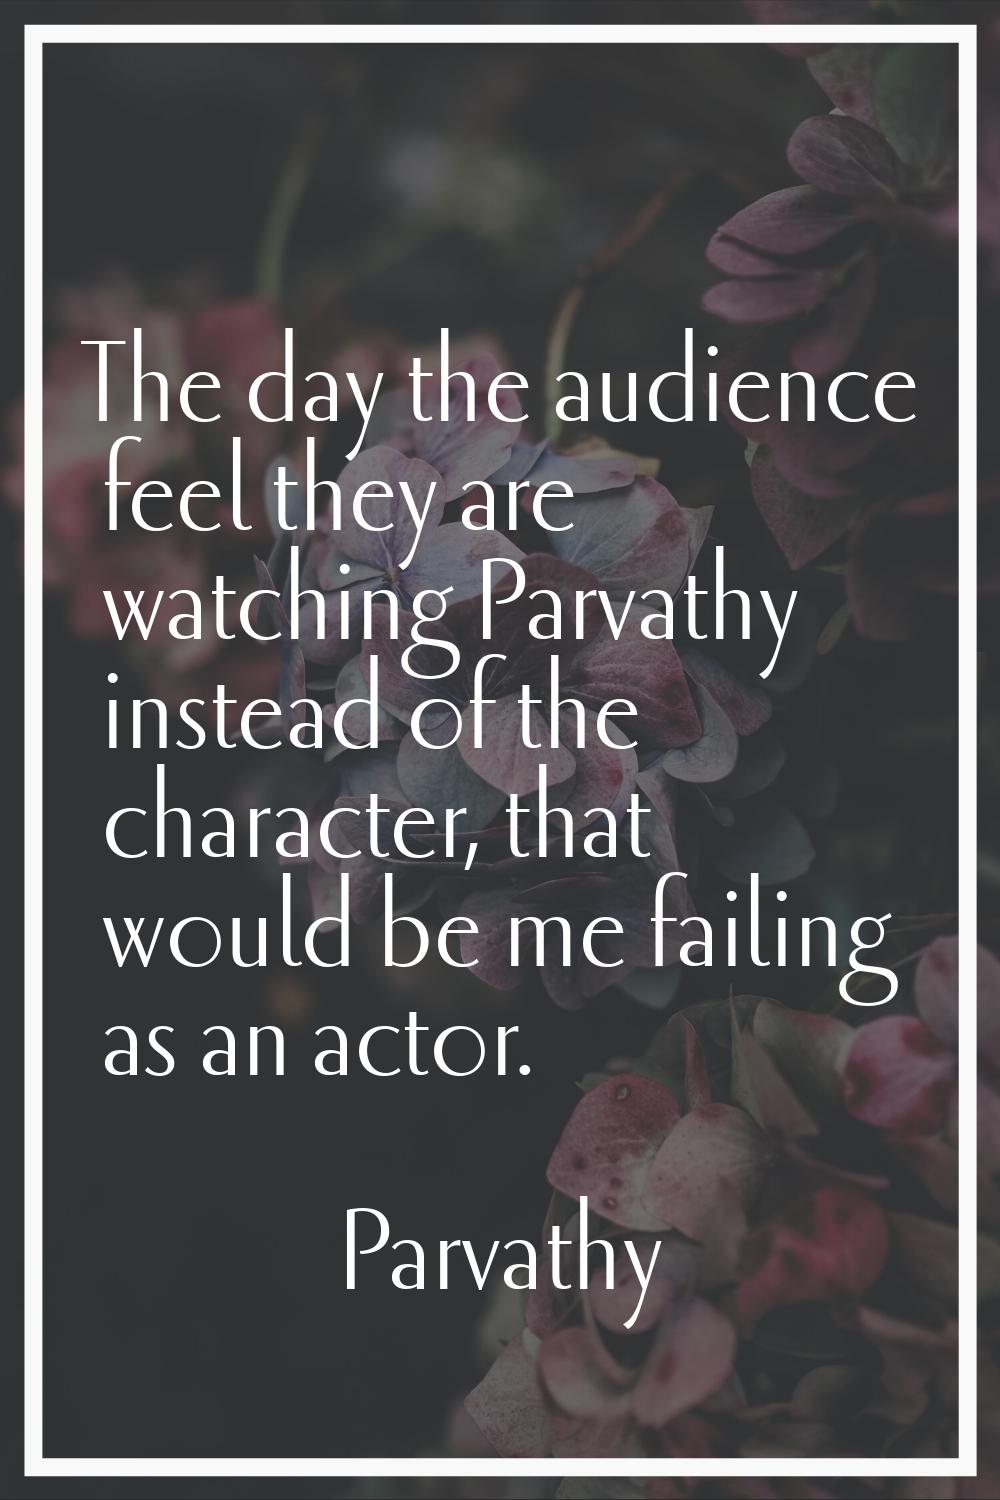 The day the audience feel they are watching Parvathy instead of the character, that would be me fai